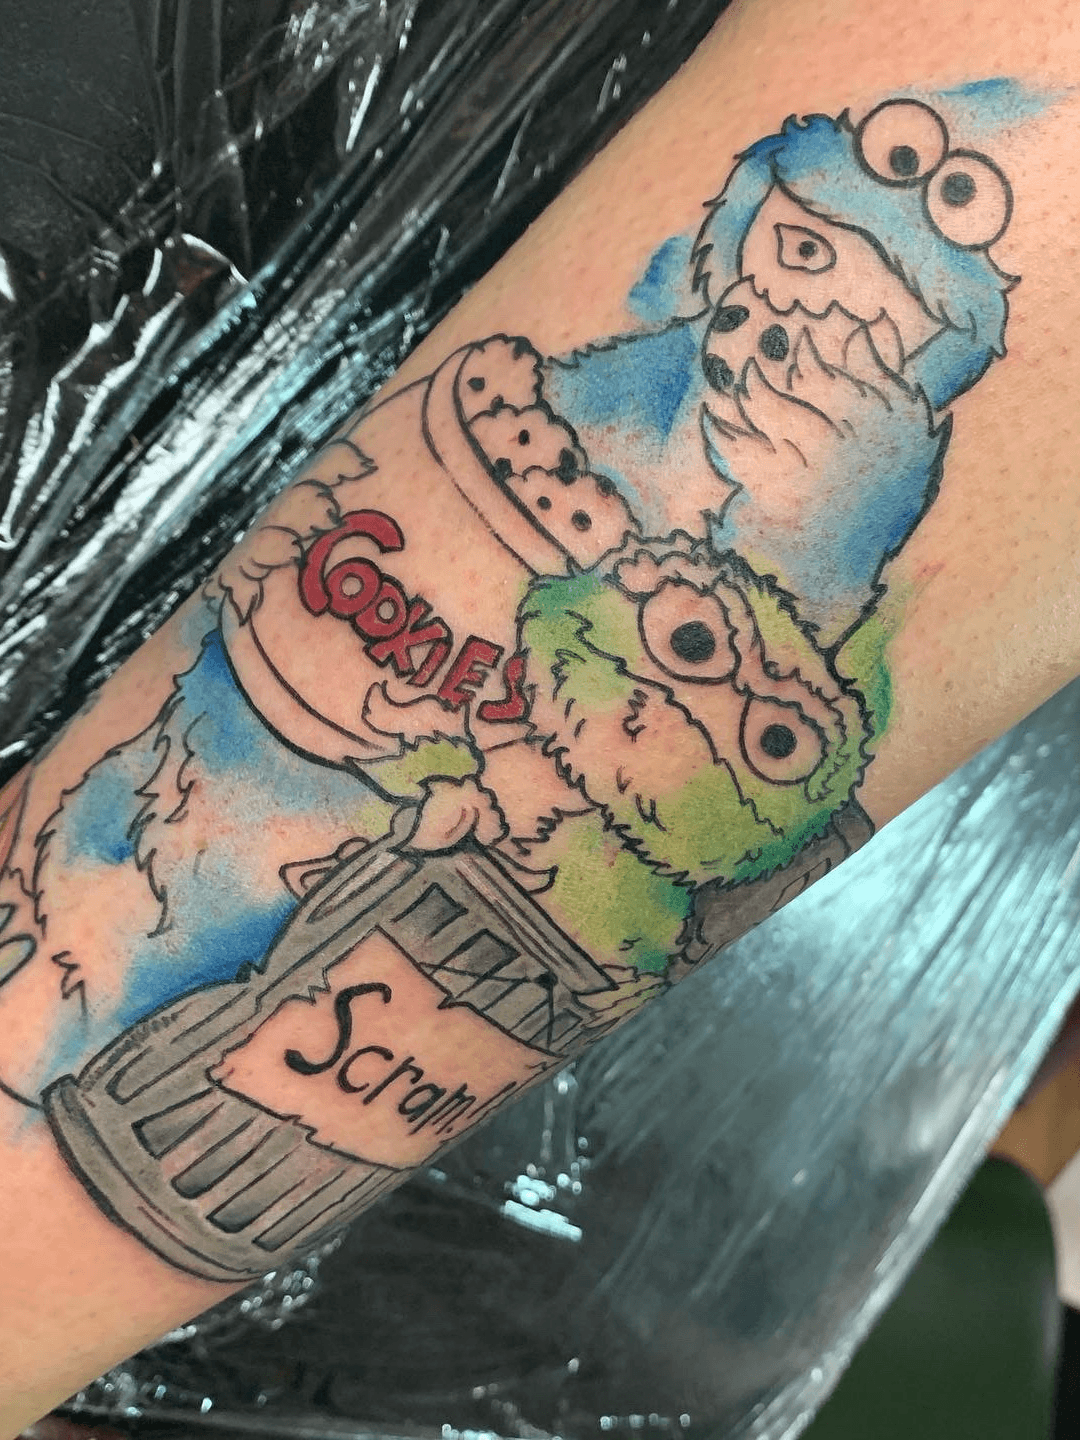 Oscars Grouchy Ink  by Alexis Covato from